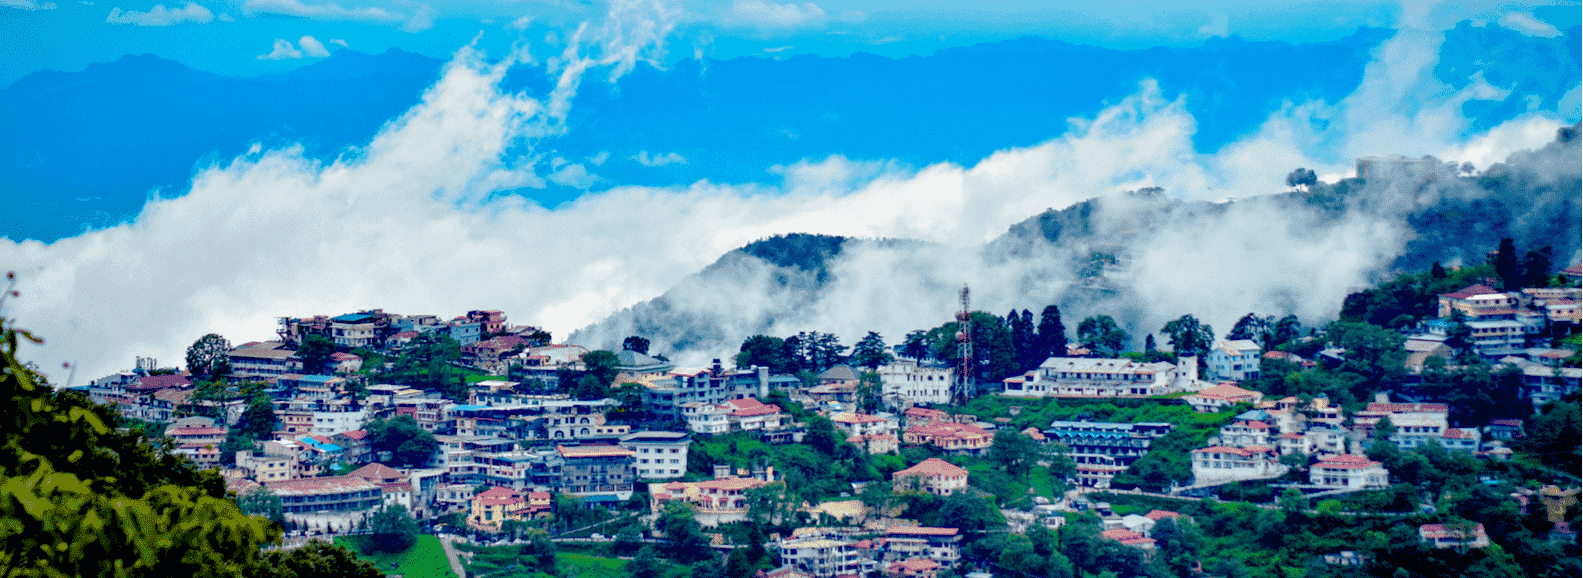 Mussoorie tourist place is one of the best places to visit in Uttarakhand